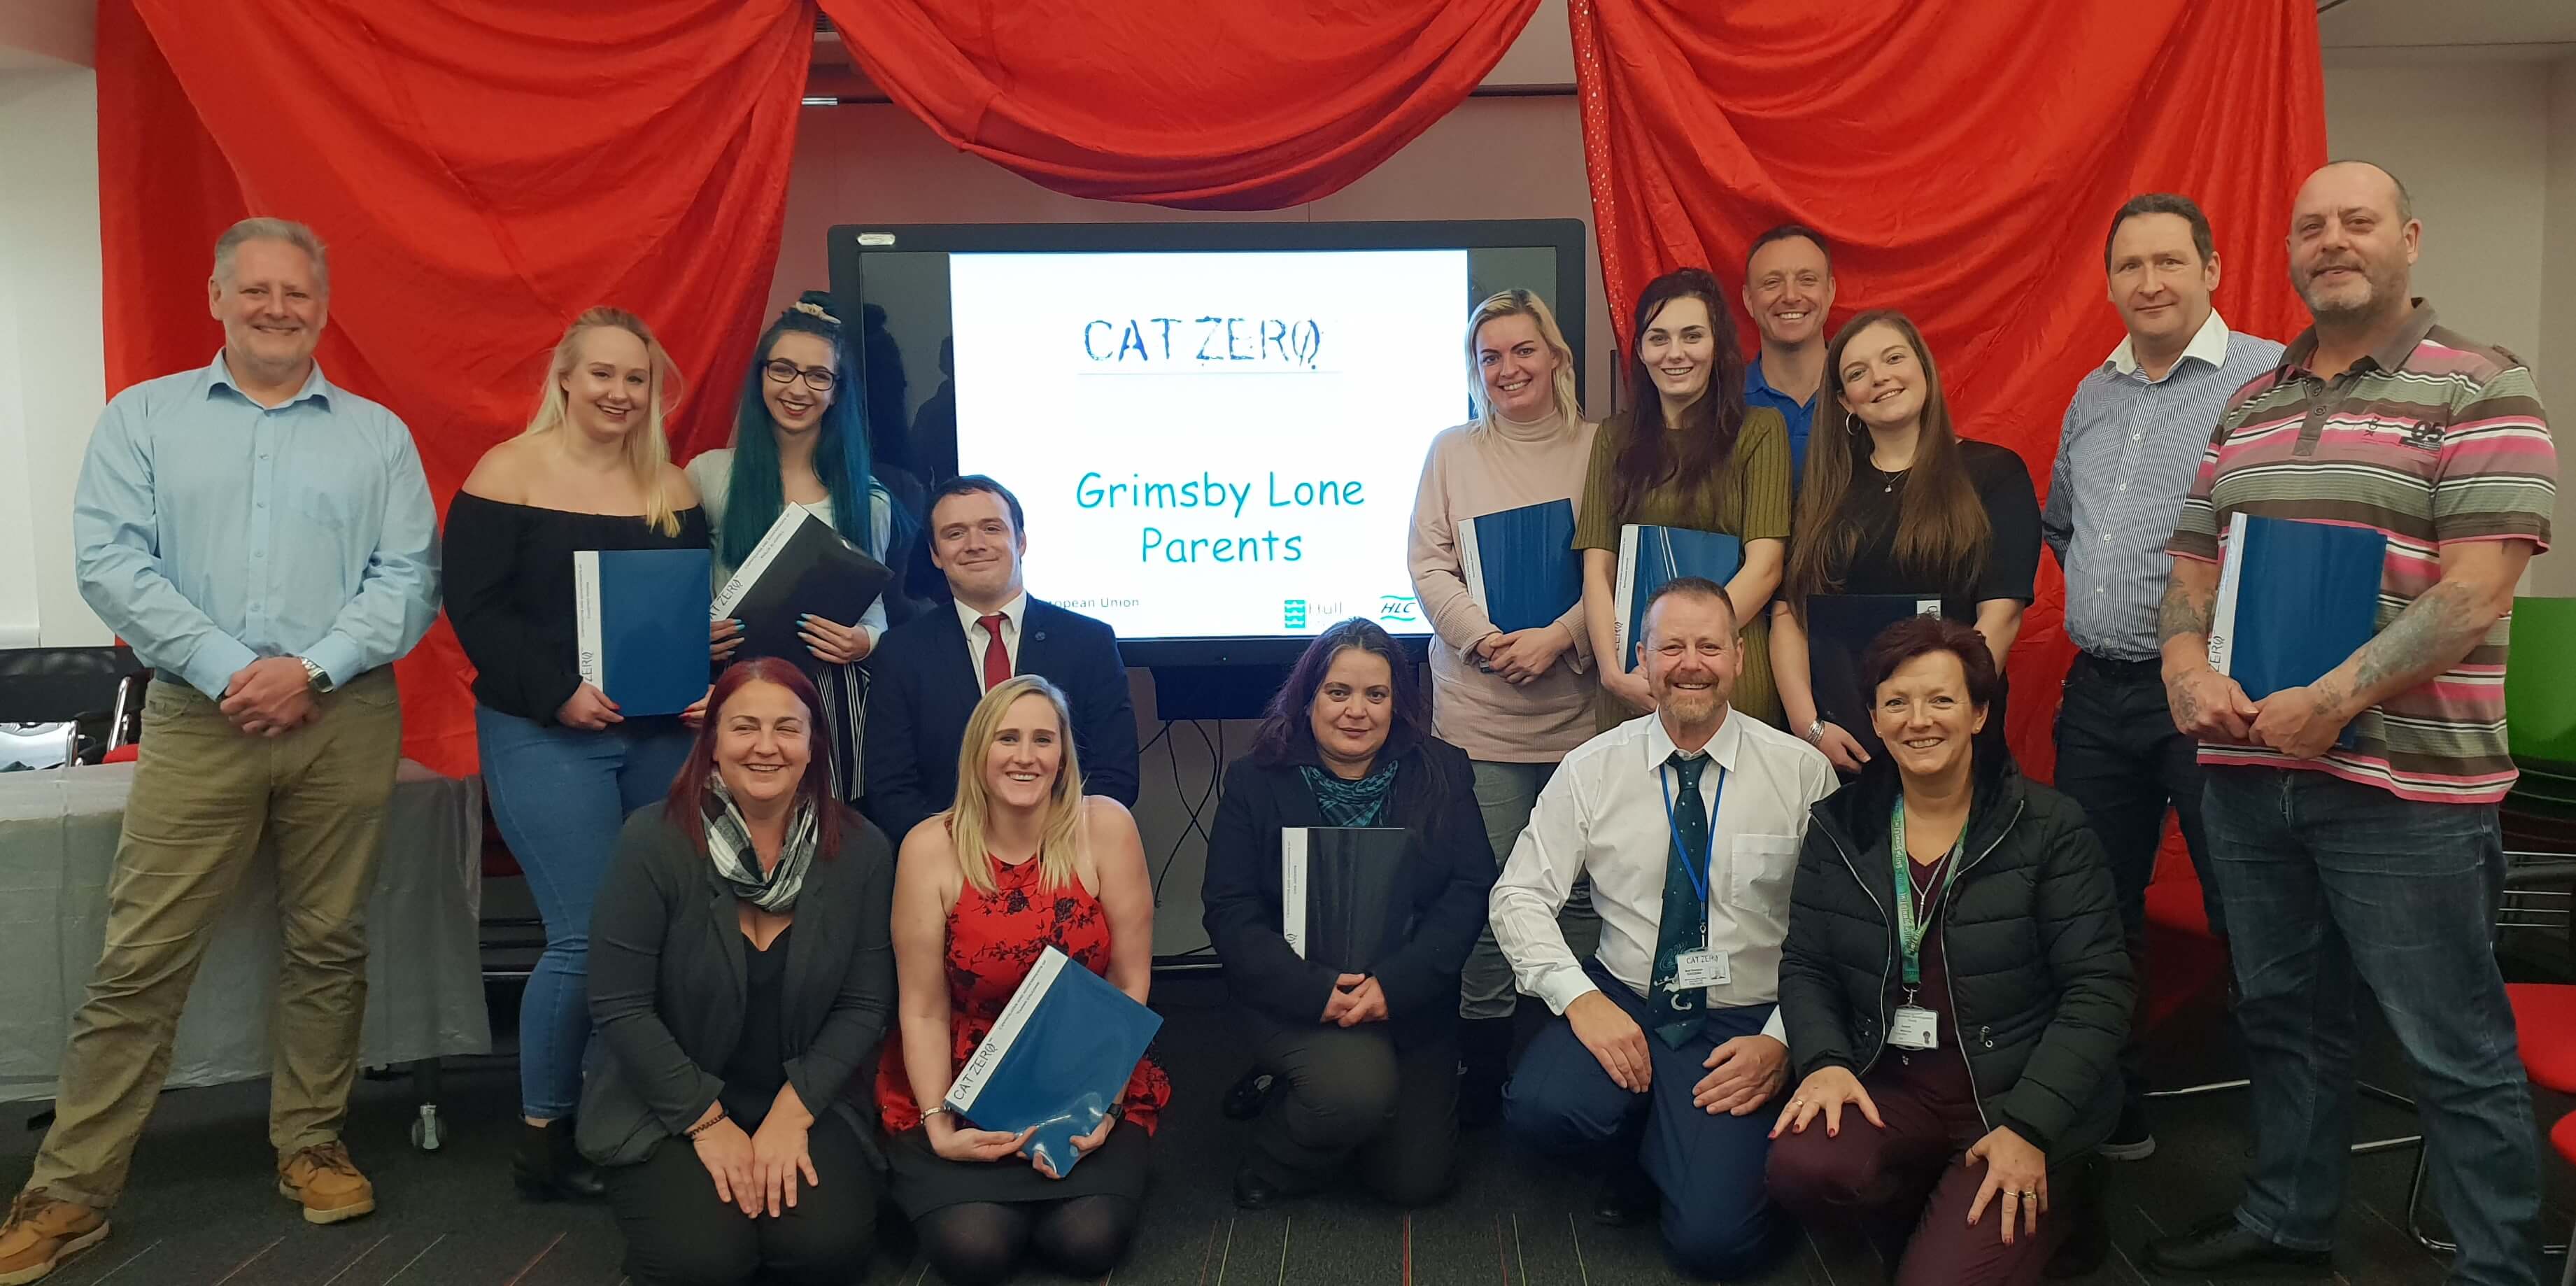 Grimsby lone parents group 2019